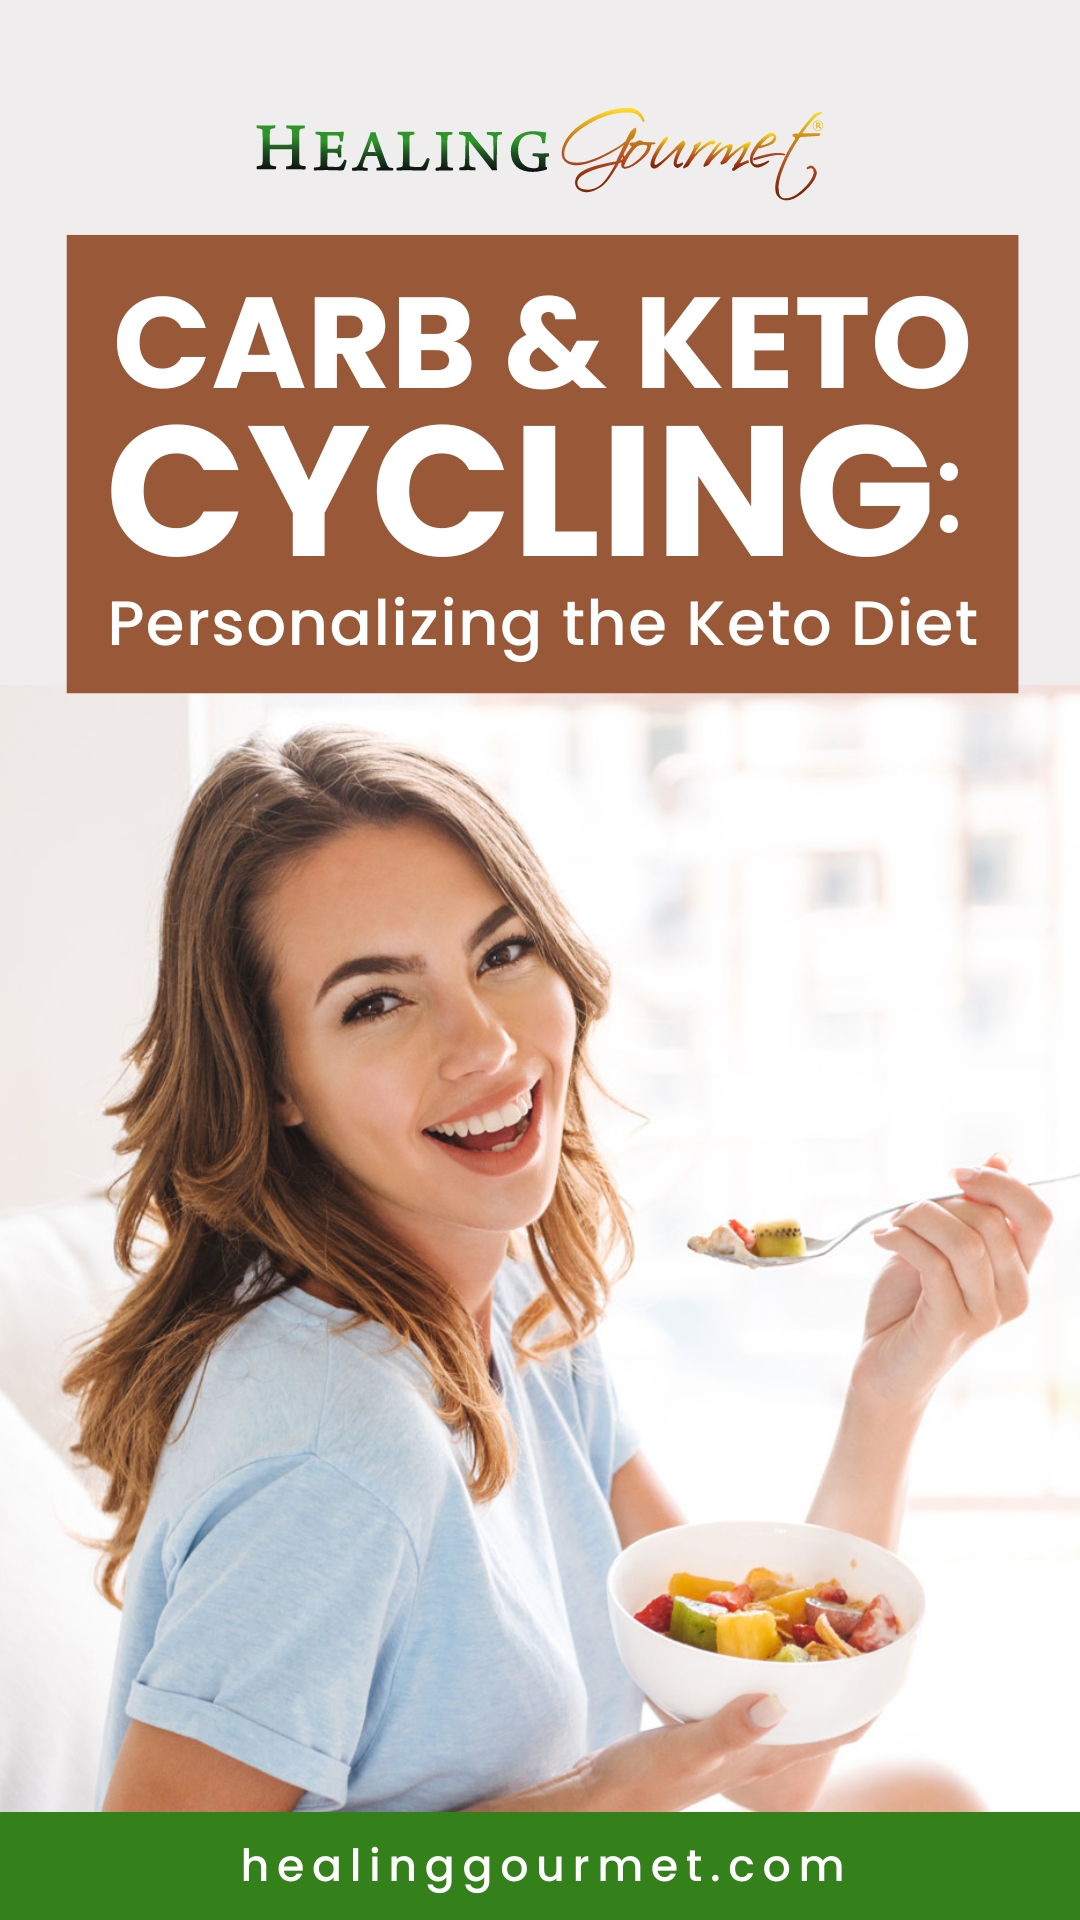 What is Carb Cycling & Keto Cycling